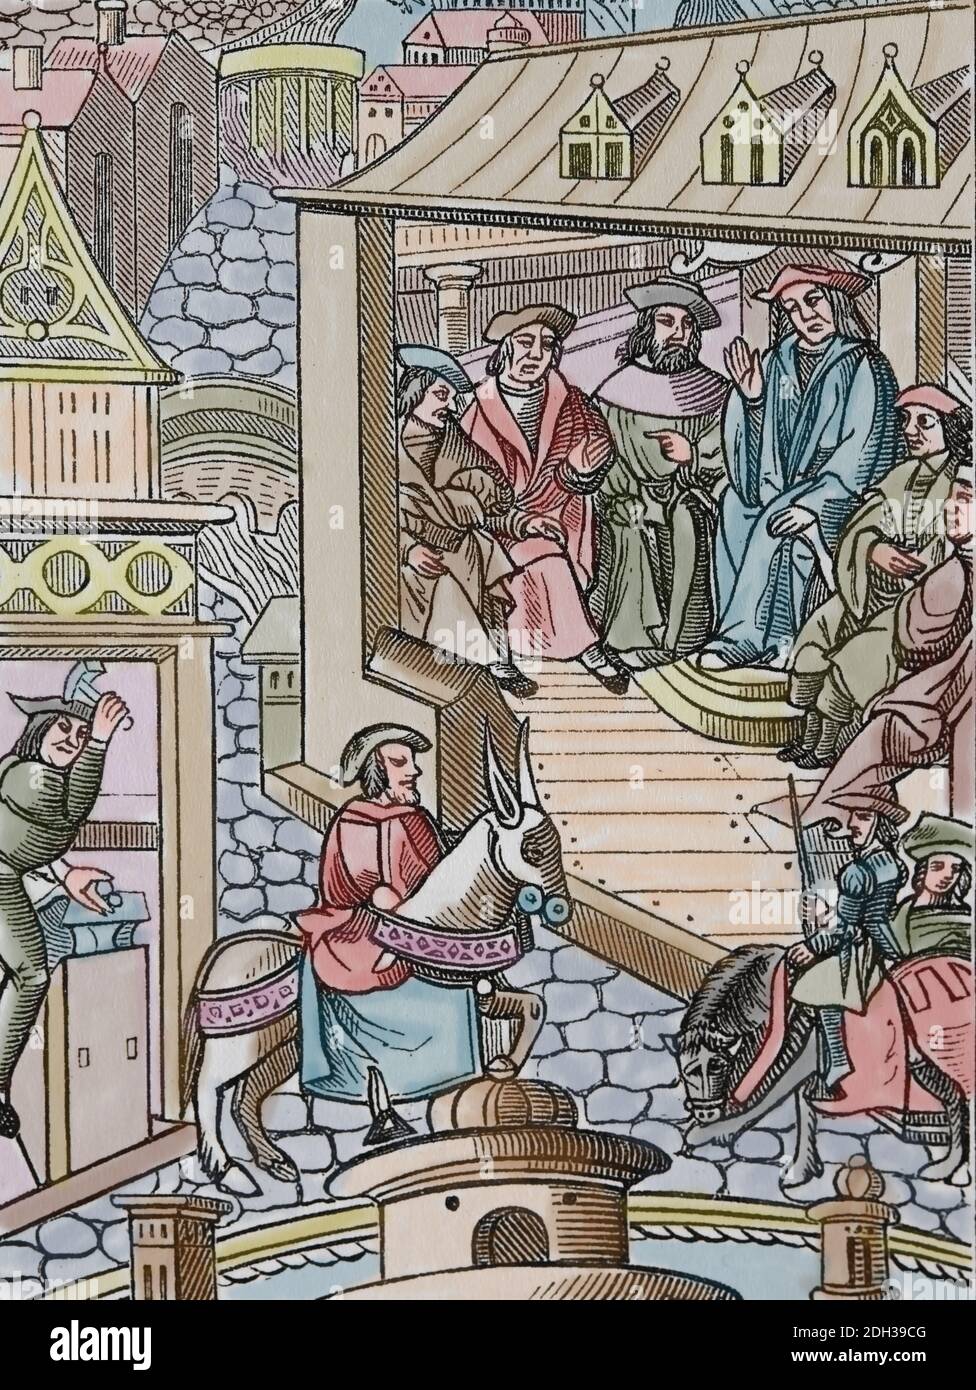 Medieval era. Life in the city. Trade, coining workshop and meeting city representatives. Engraving. Later colouration. Stock Photo